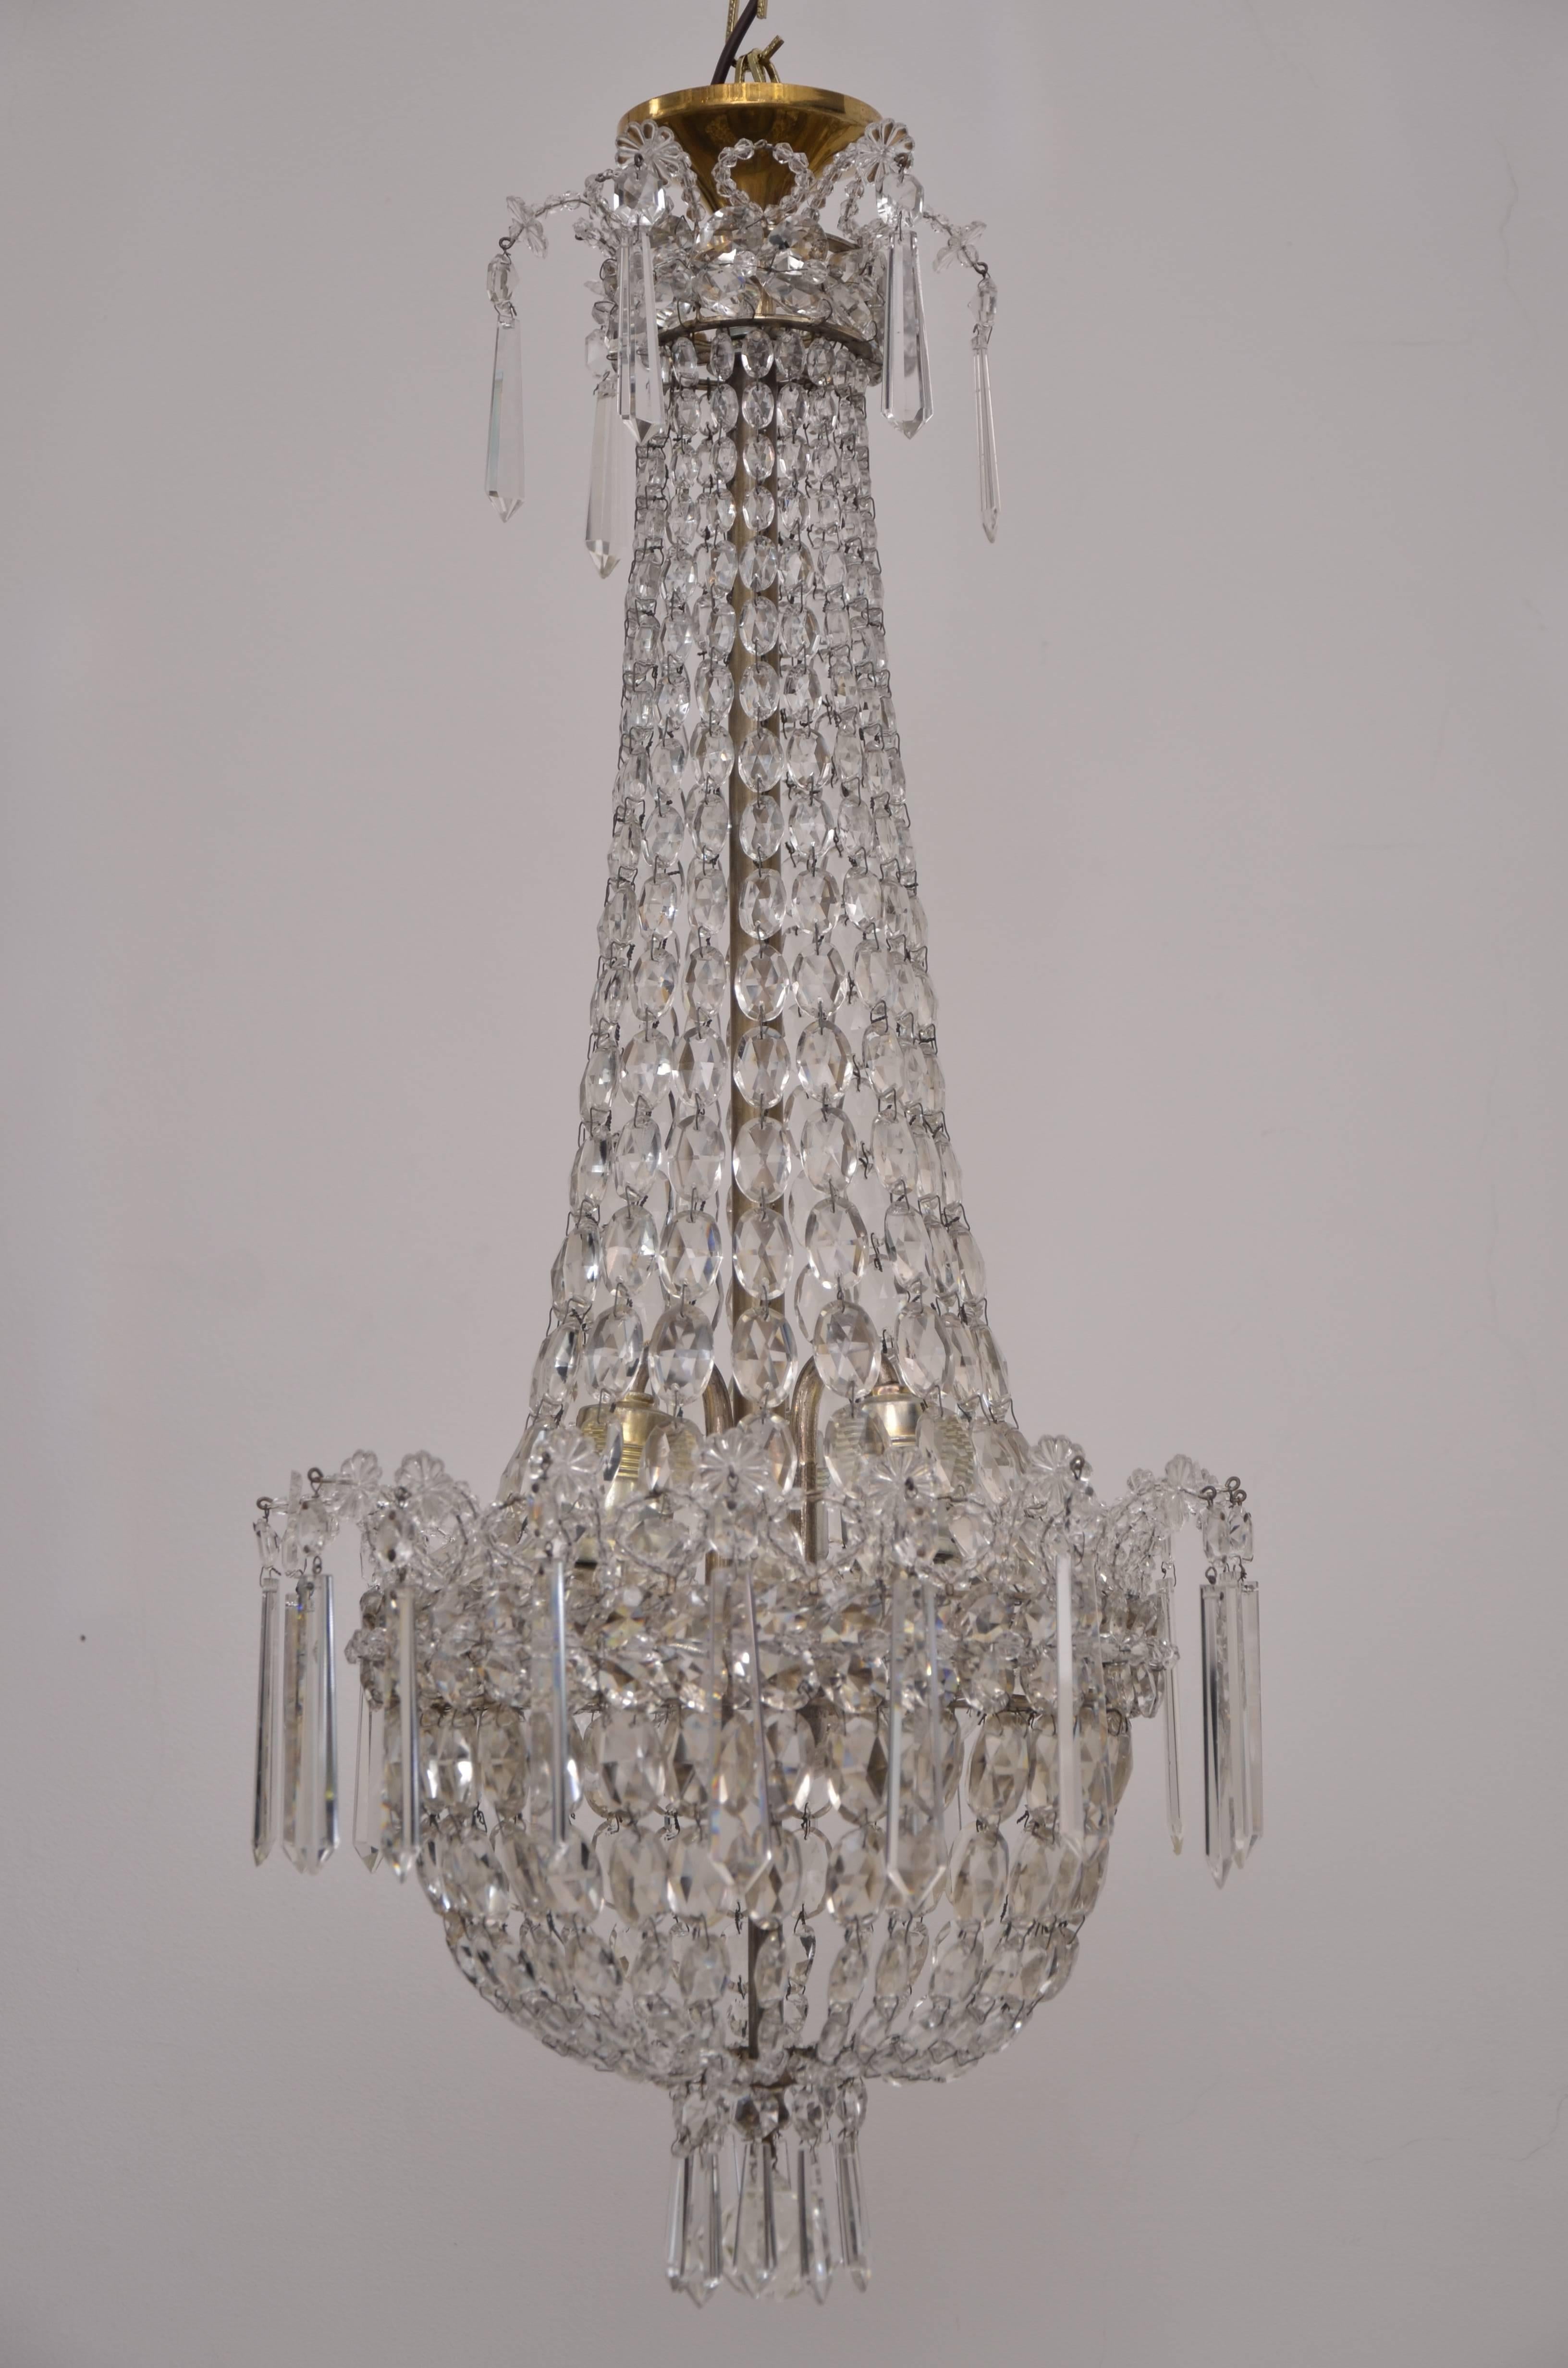 Charming crystal chandelier attributed to Lobmeyr, circa 1920s
Excellent original condition.